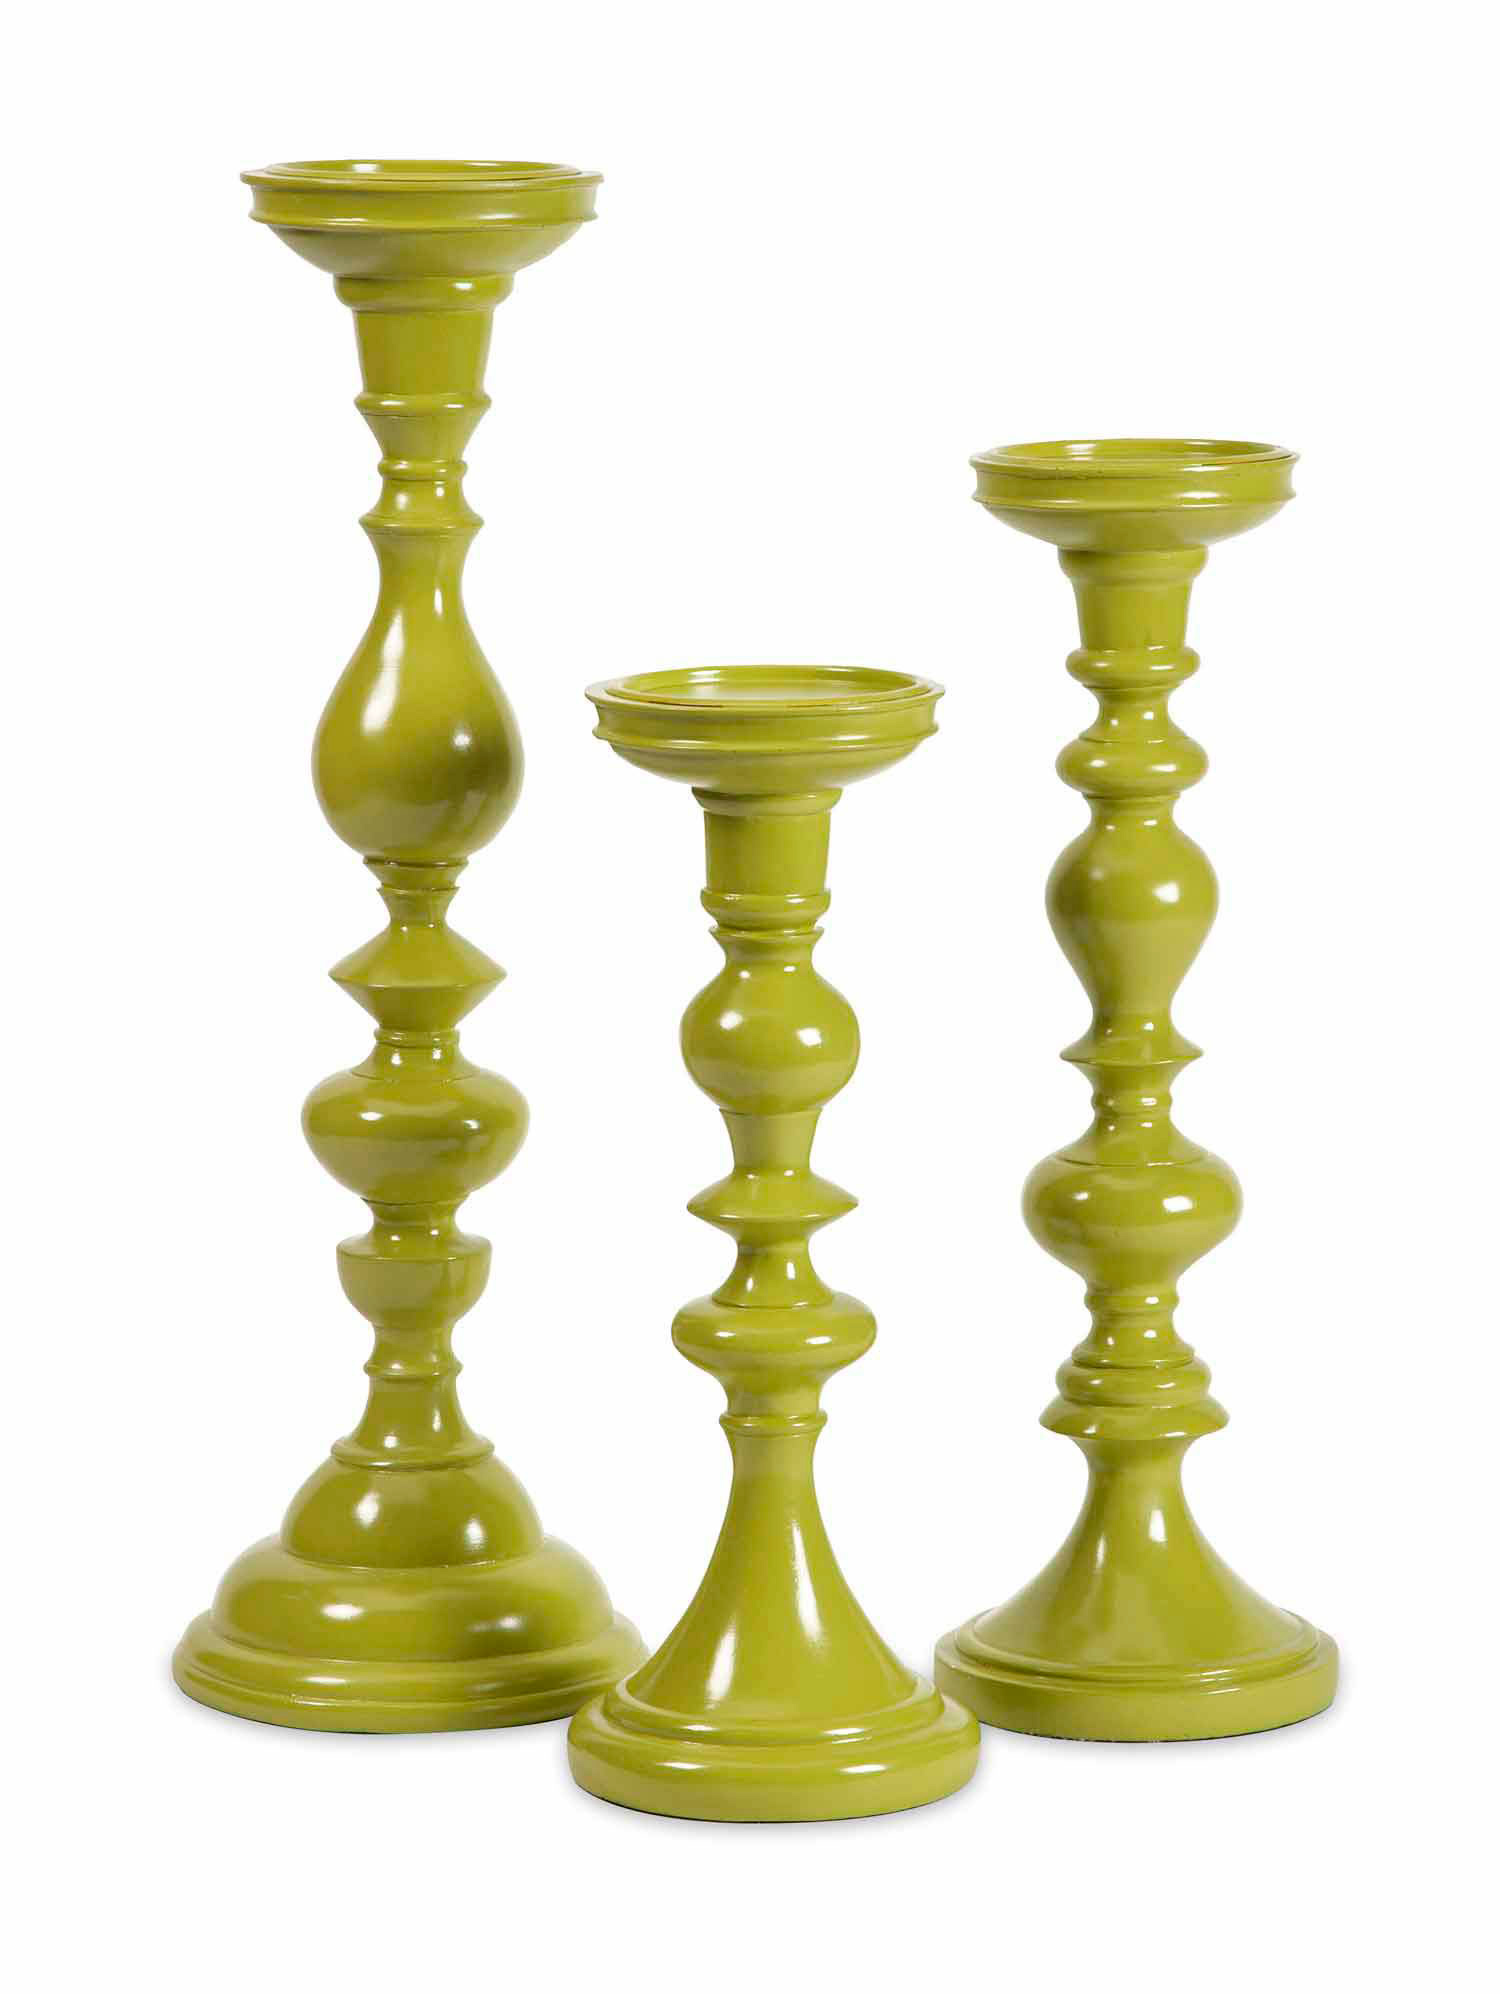 IMAX Essentials Green Apple Candle Holders - Set of 3